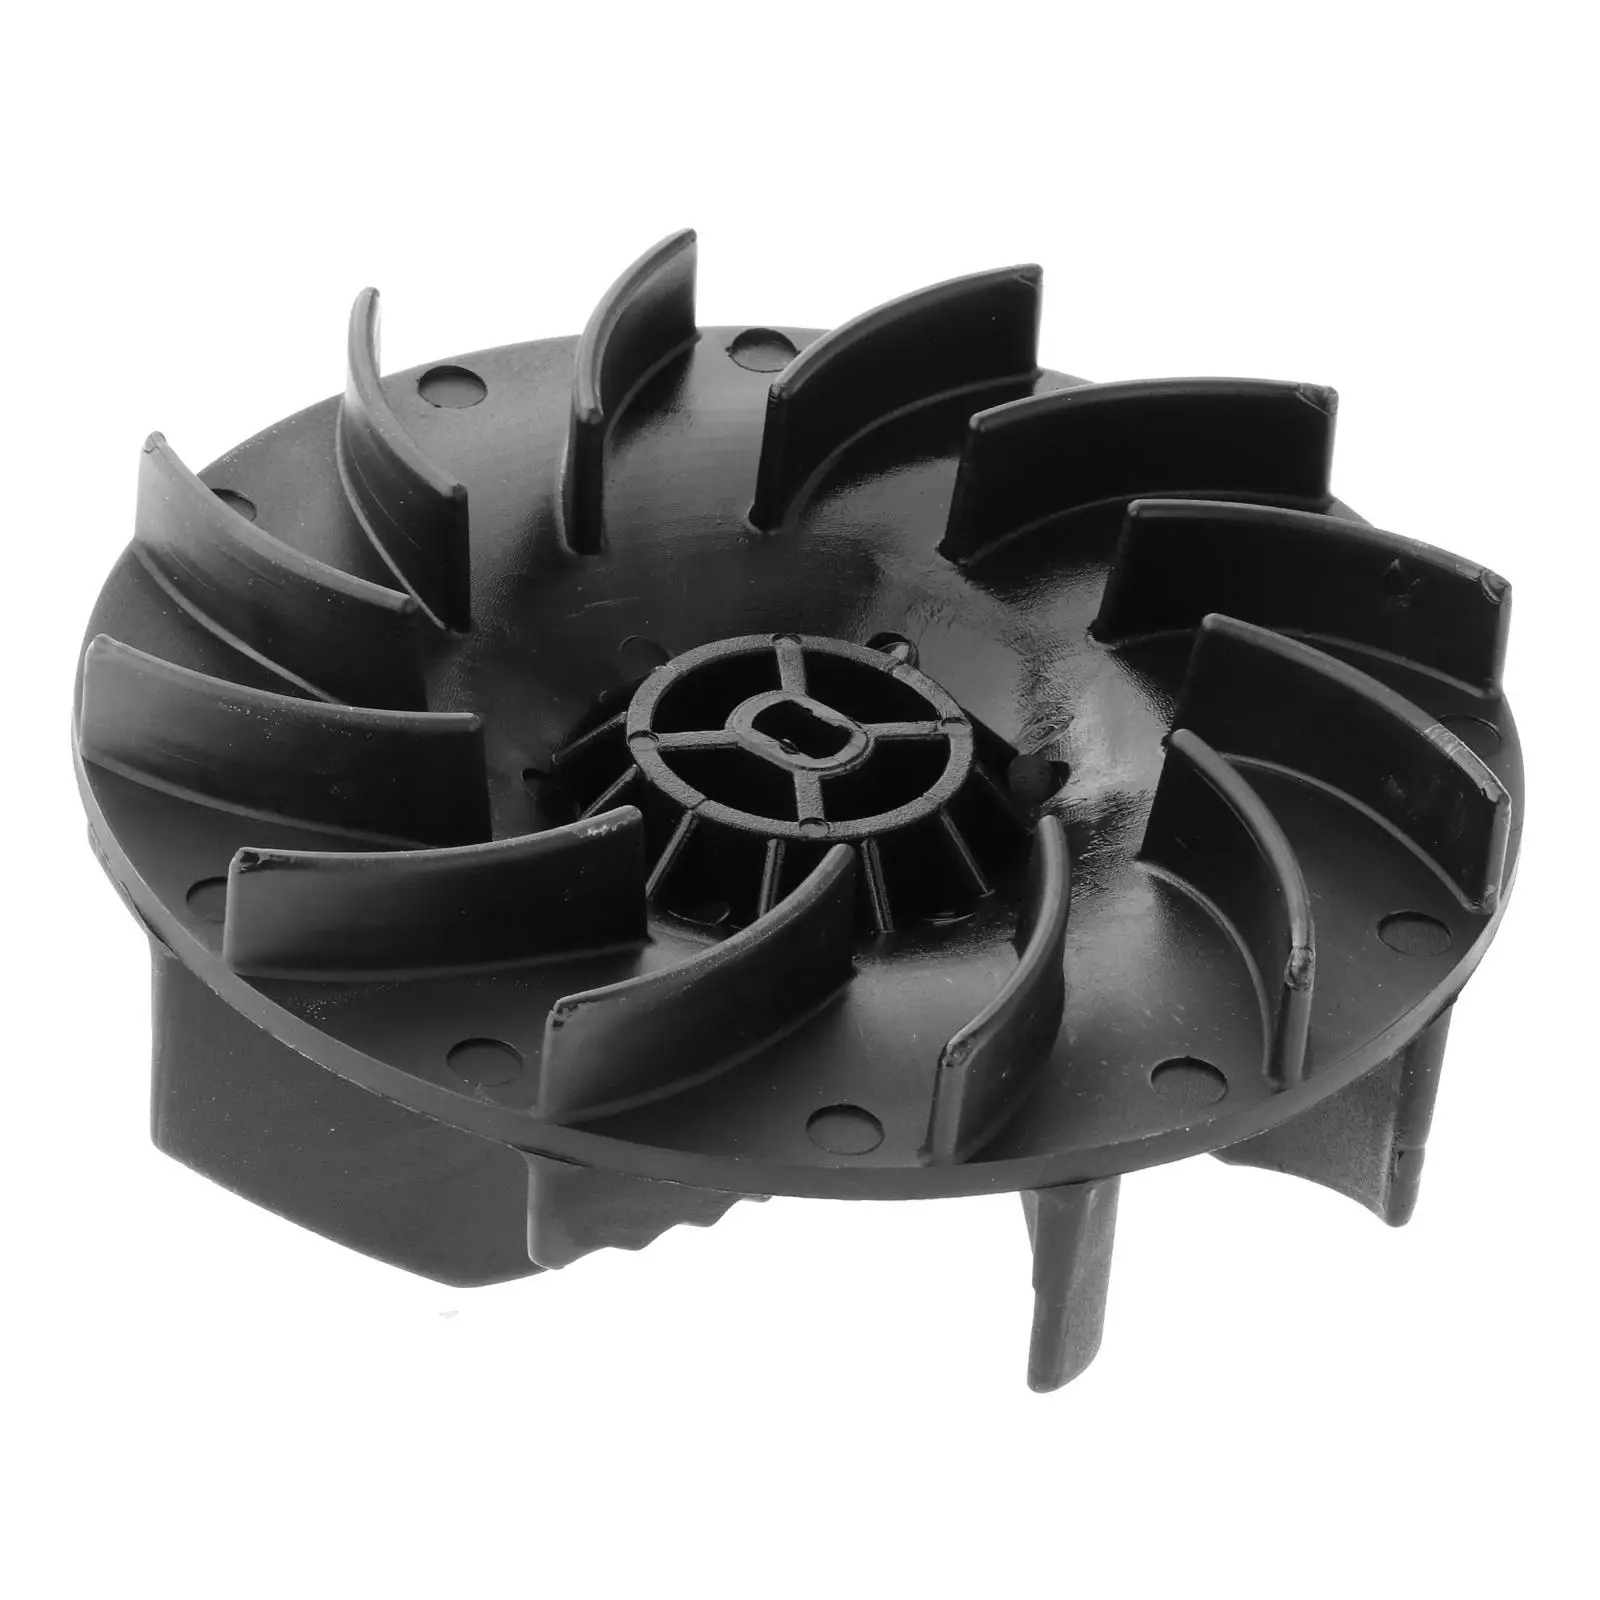   Generic Replace Fit for Electric Blower VAC Impeller Fan